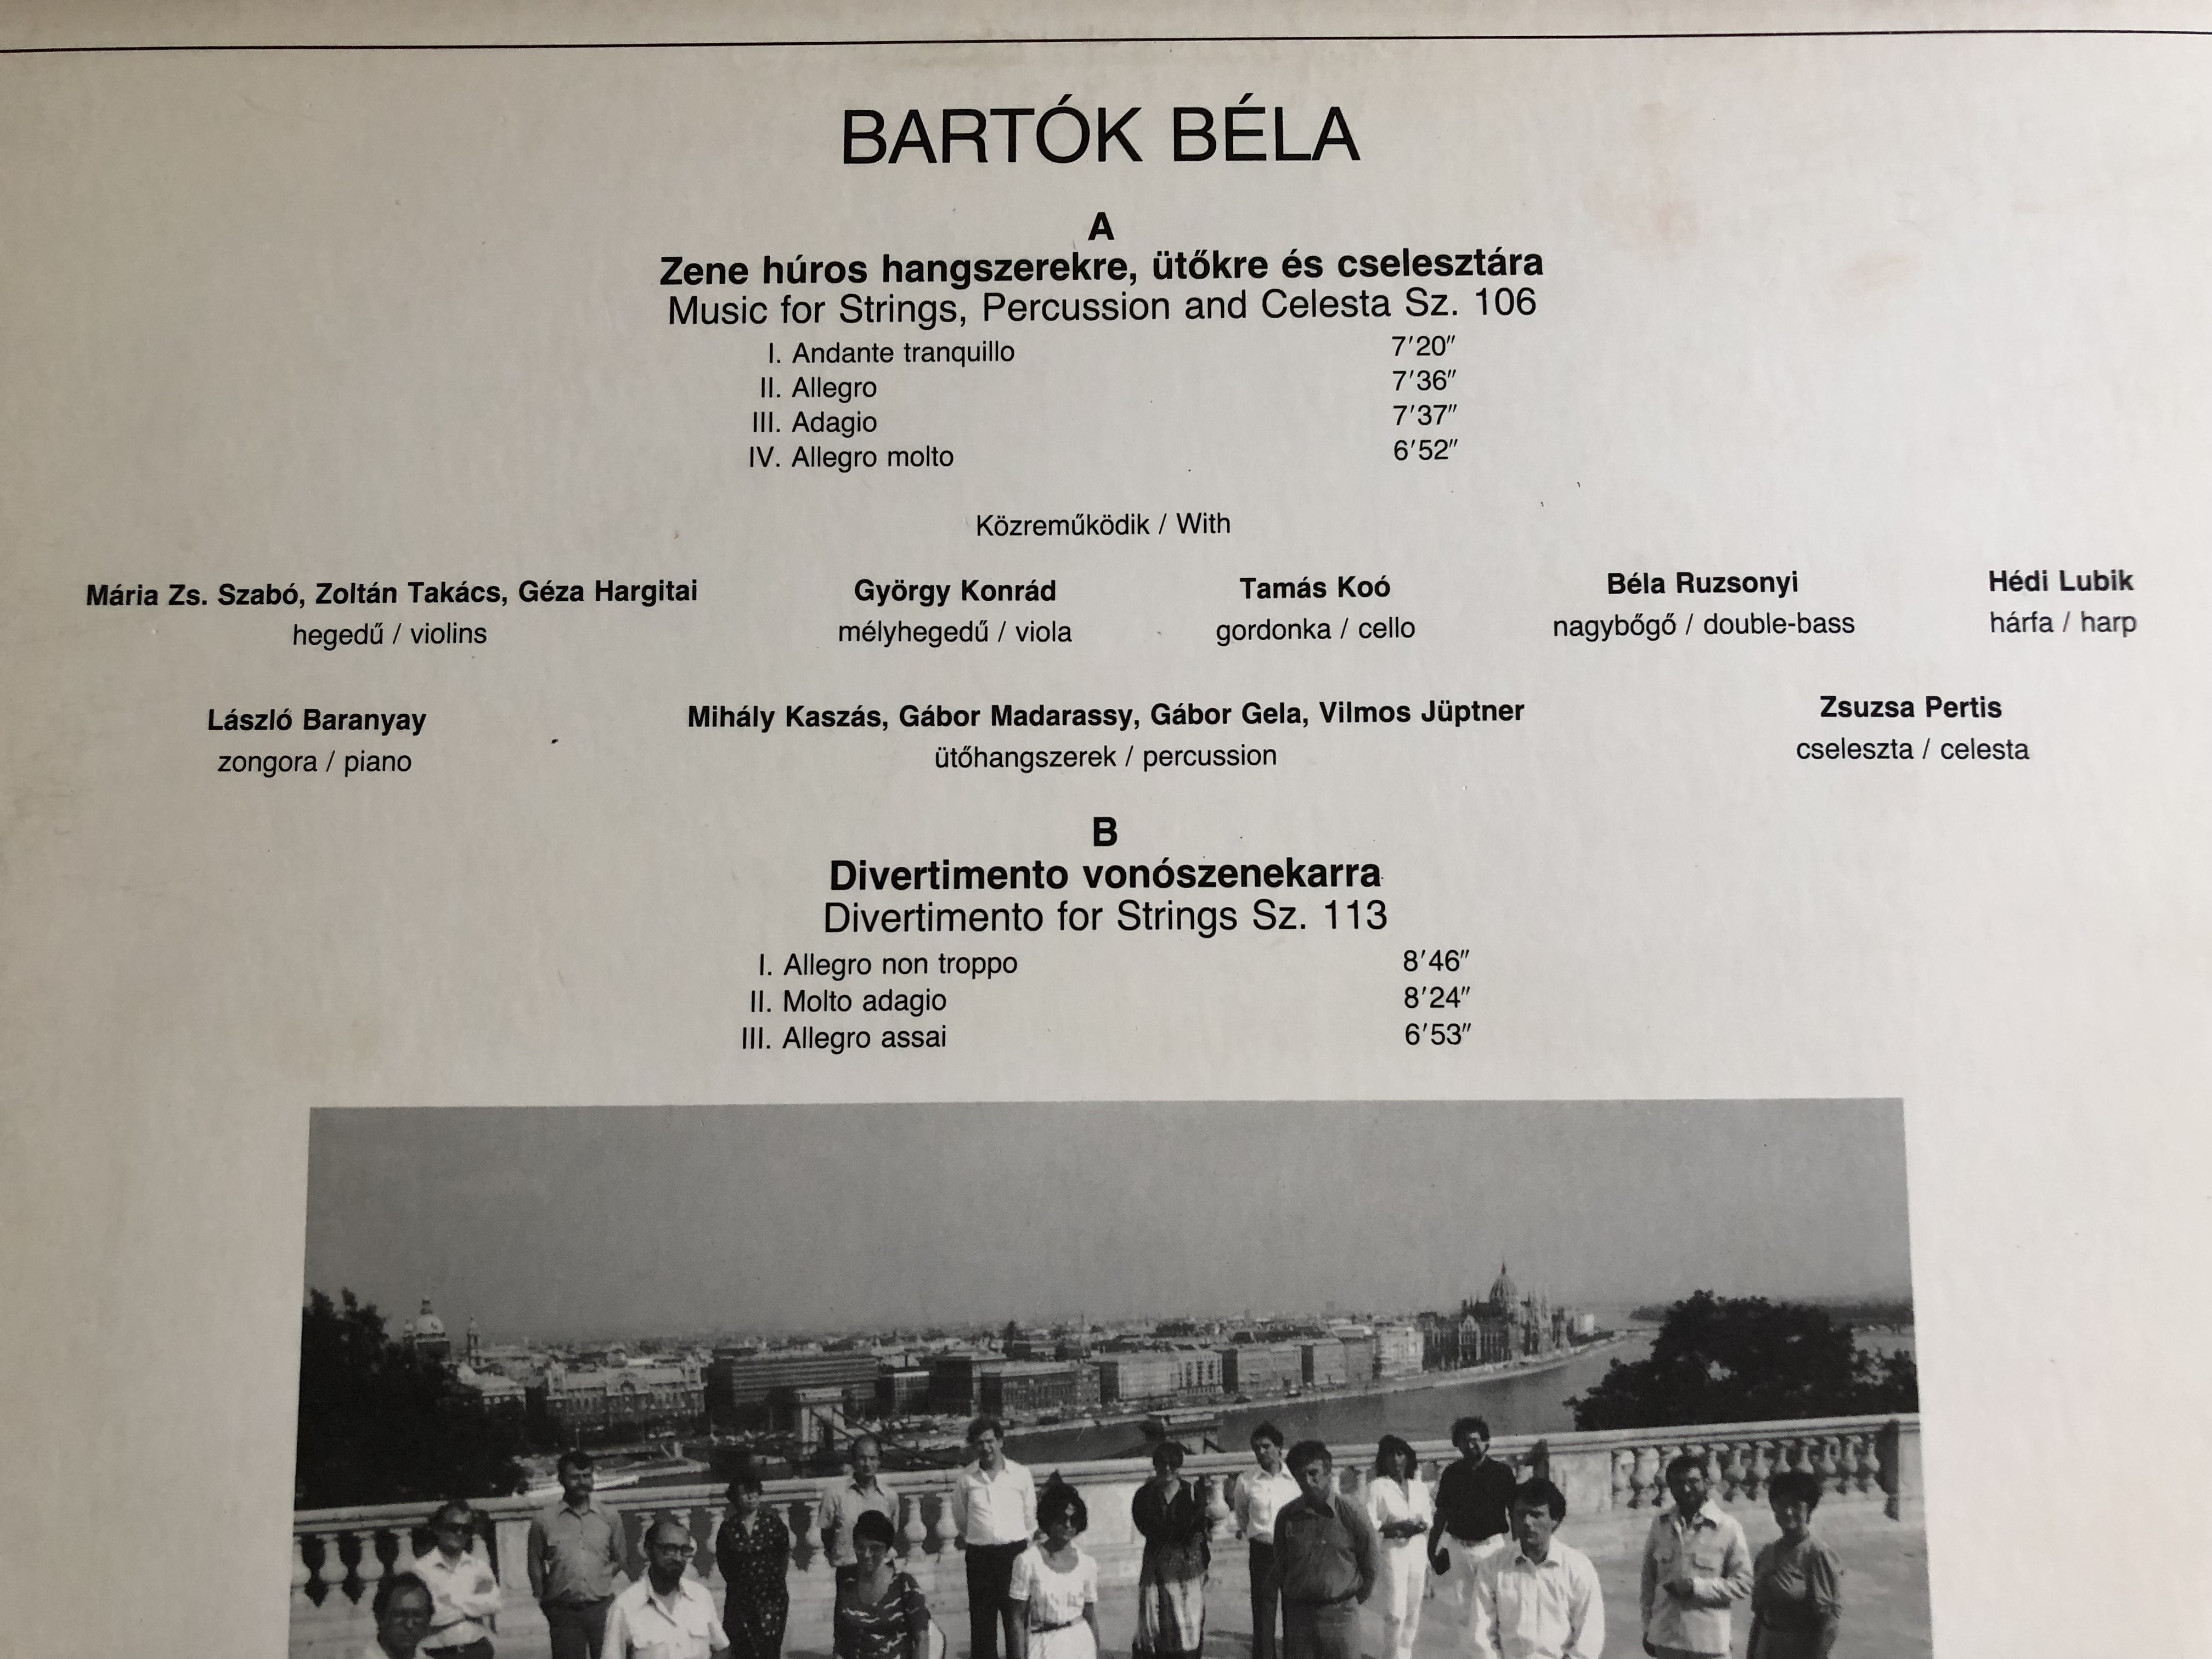 bart-k-divertimento-music-for-strings-percussion-and-celesta-conducted-j-nos-rolla-liszt-ferenc-chamber-orchestra-budapest-hungaroton-lp-stereo-slpd-12531-3-.jpg